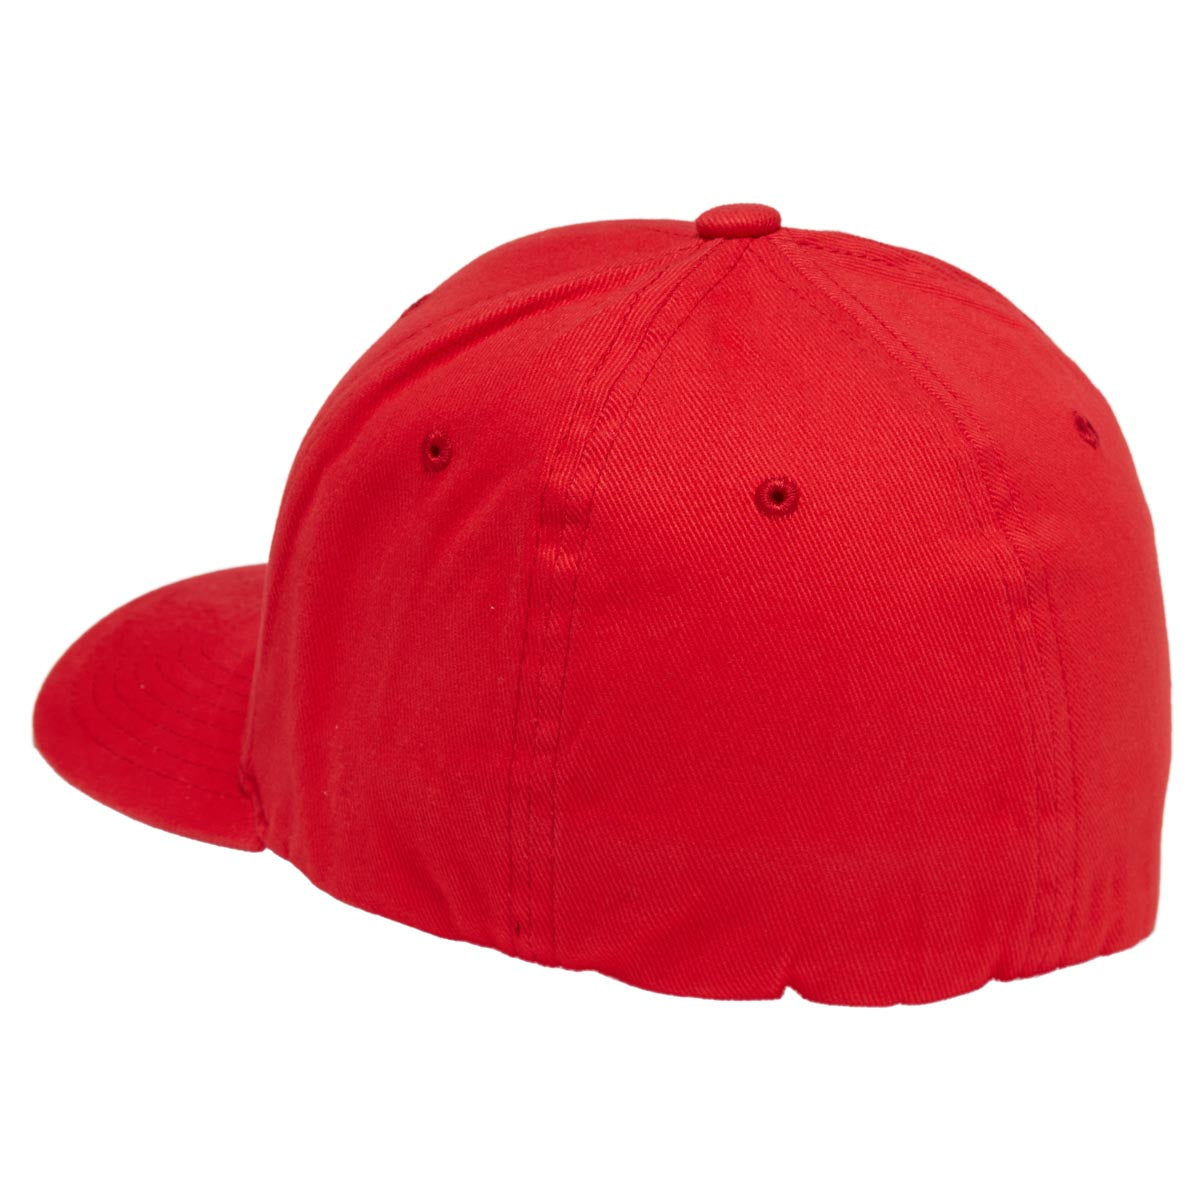 Thank You Reaper Cloud FlexFit Hat - Red image 2